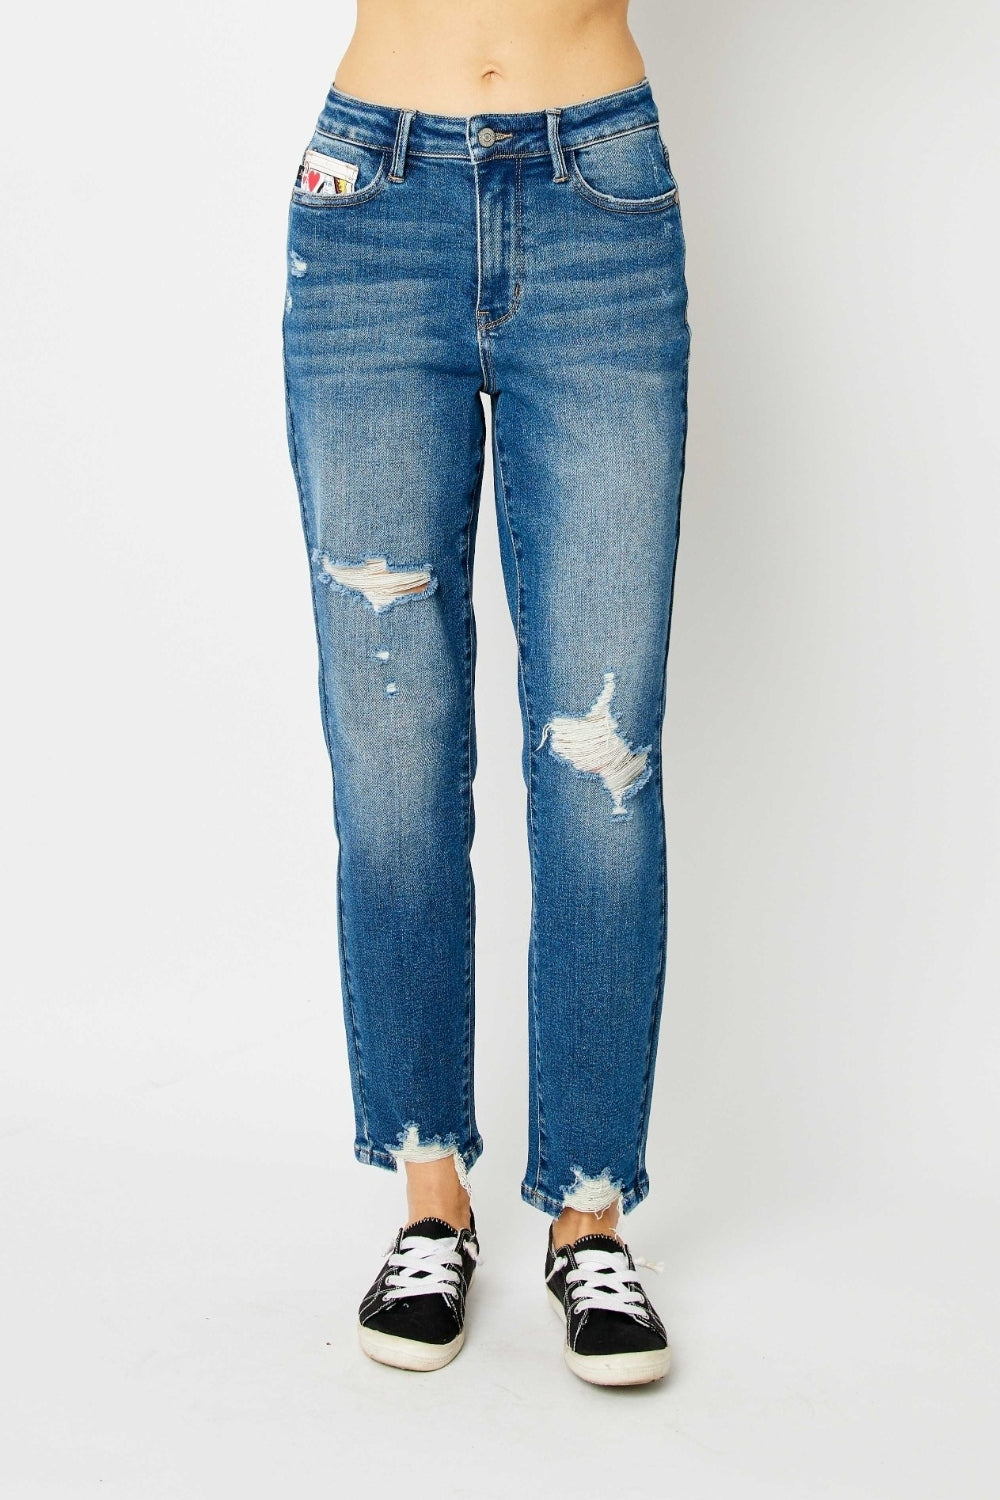 Judy Blue Full Size Distressed Slim Jeans-Denim-Inspired by Justeen-Women's Clothing Boutique